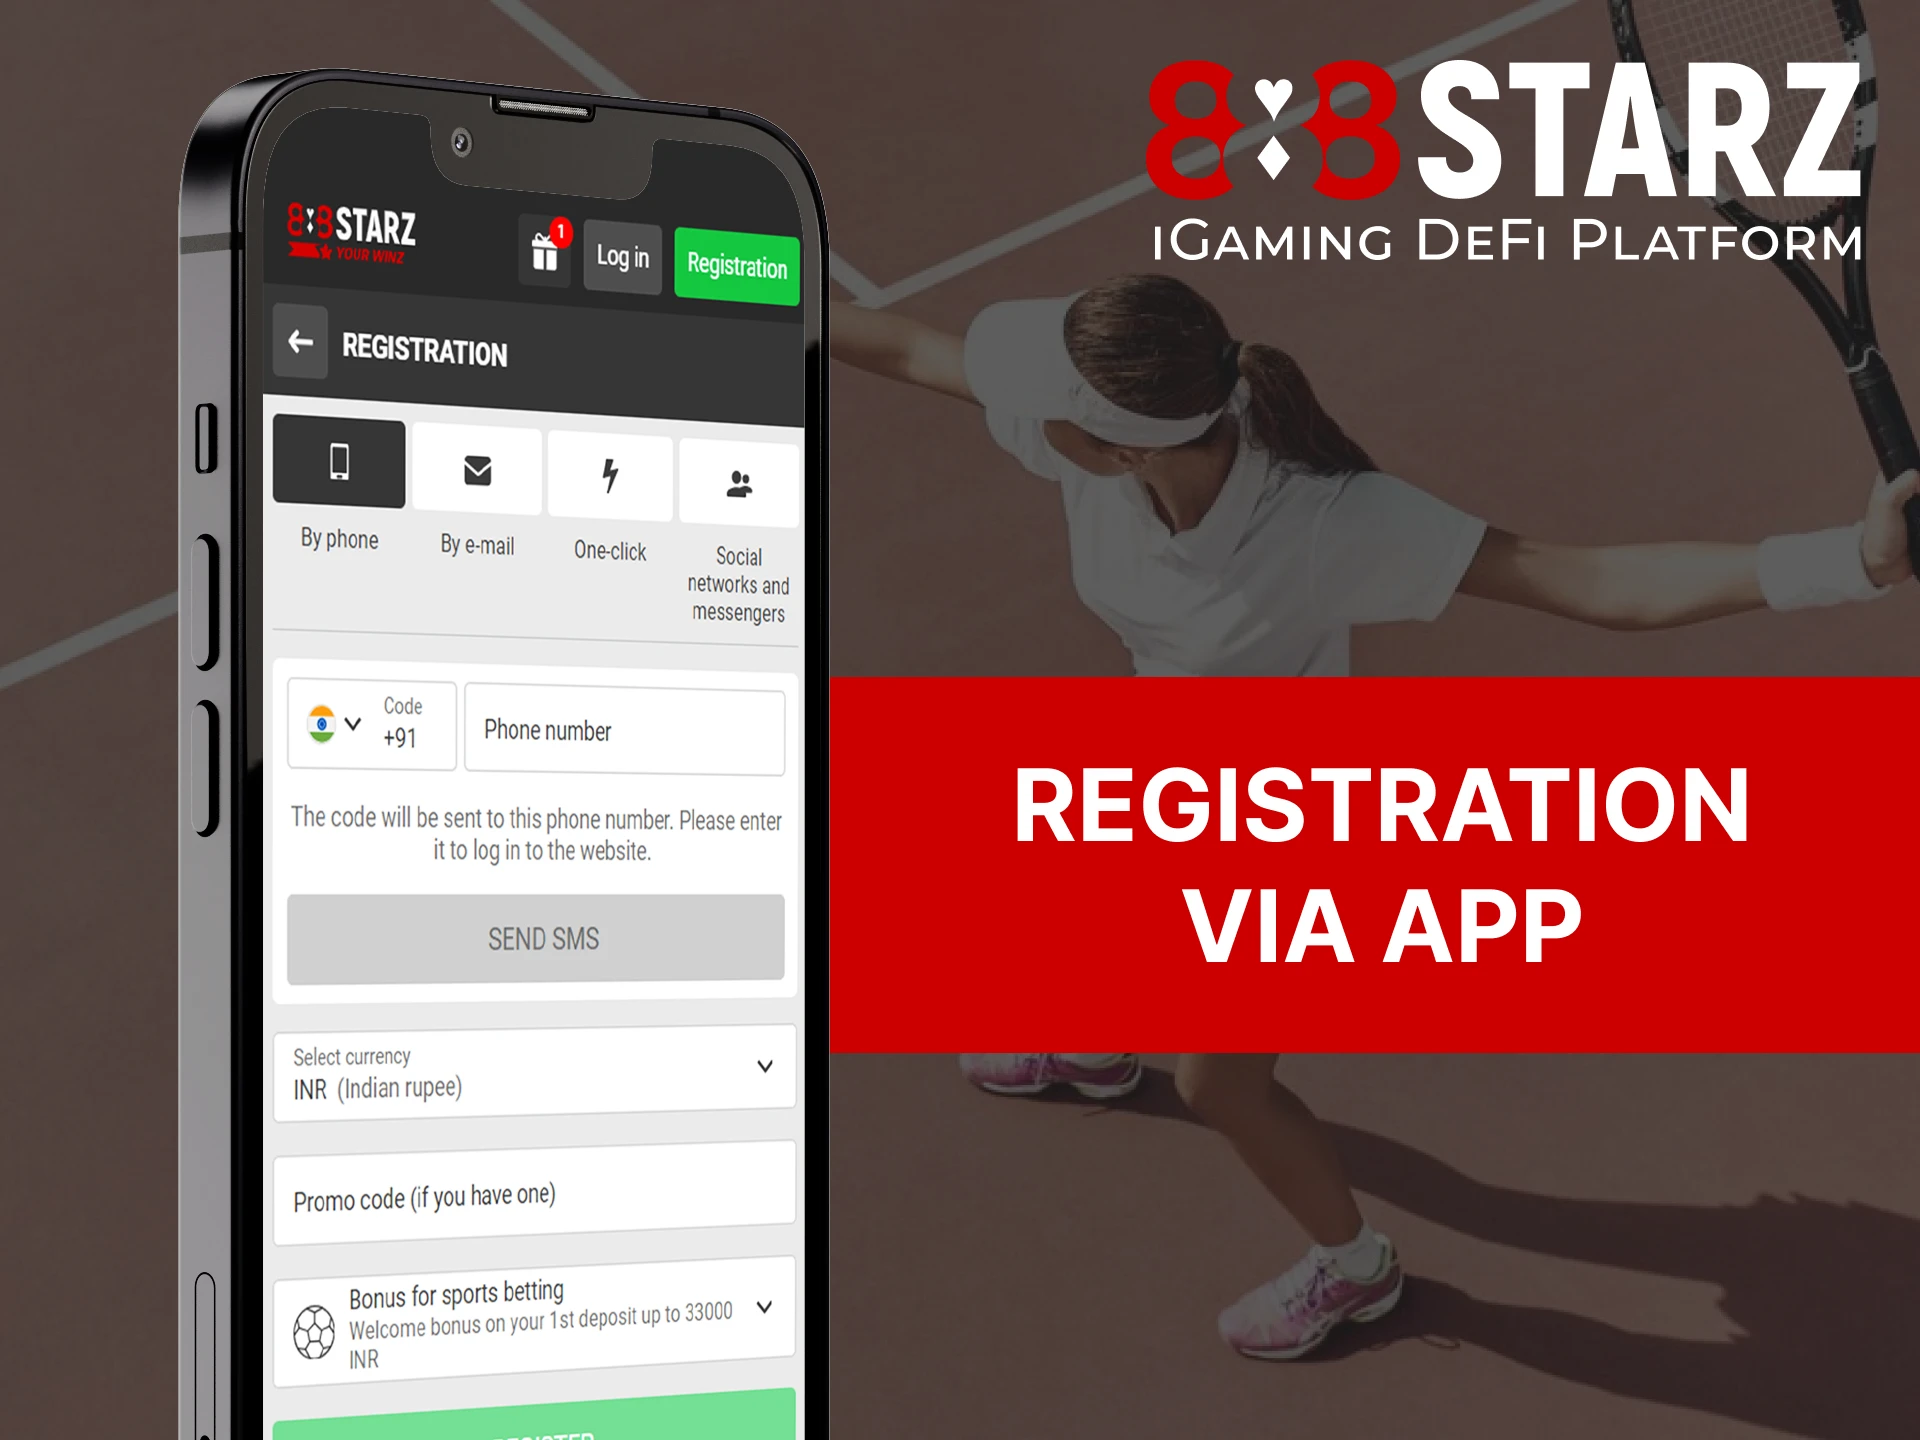 Register with 888Starz using the mobile app.